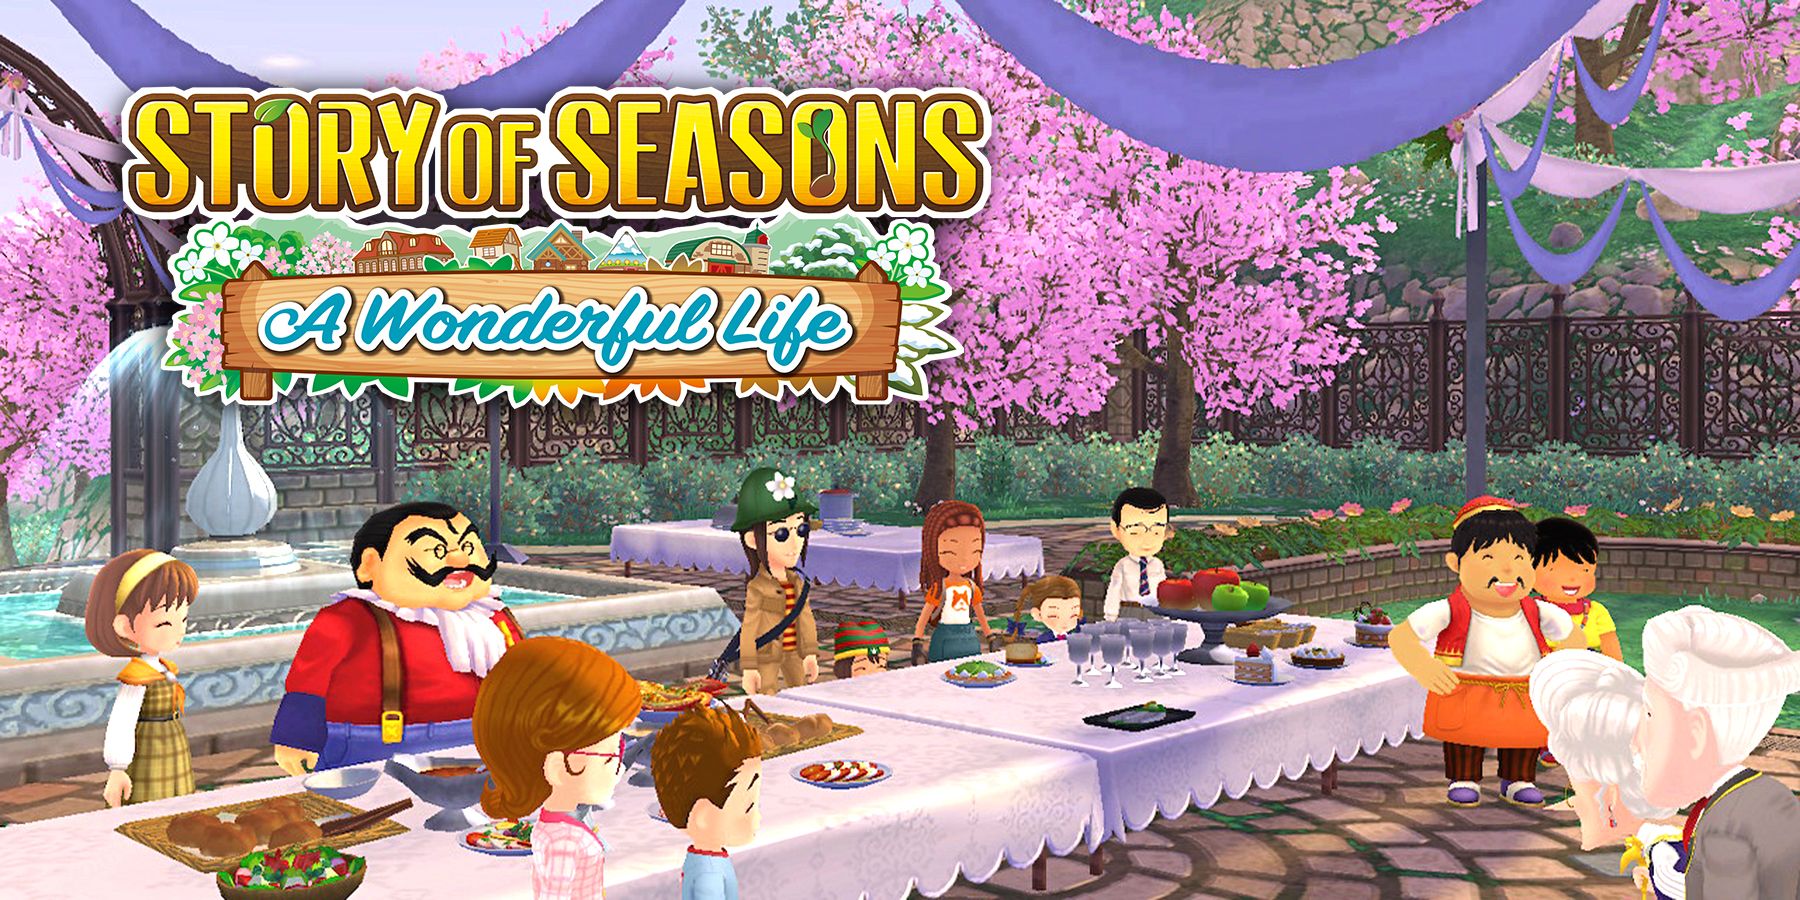 Story A Seasons: Review Life of Wonderful